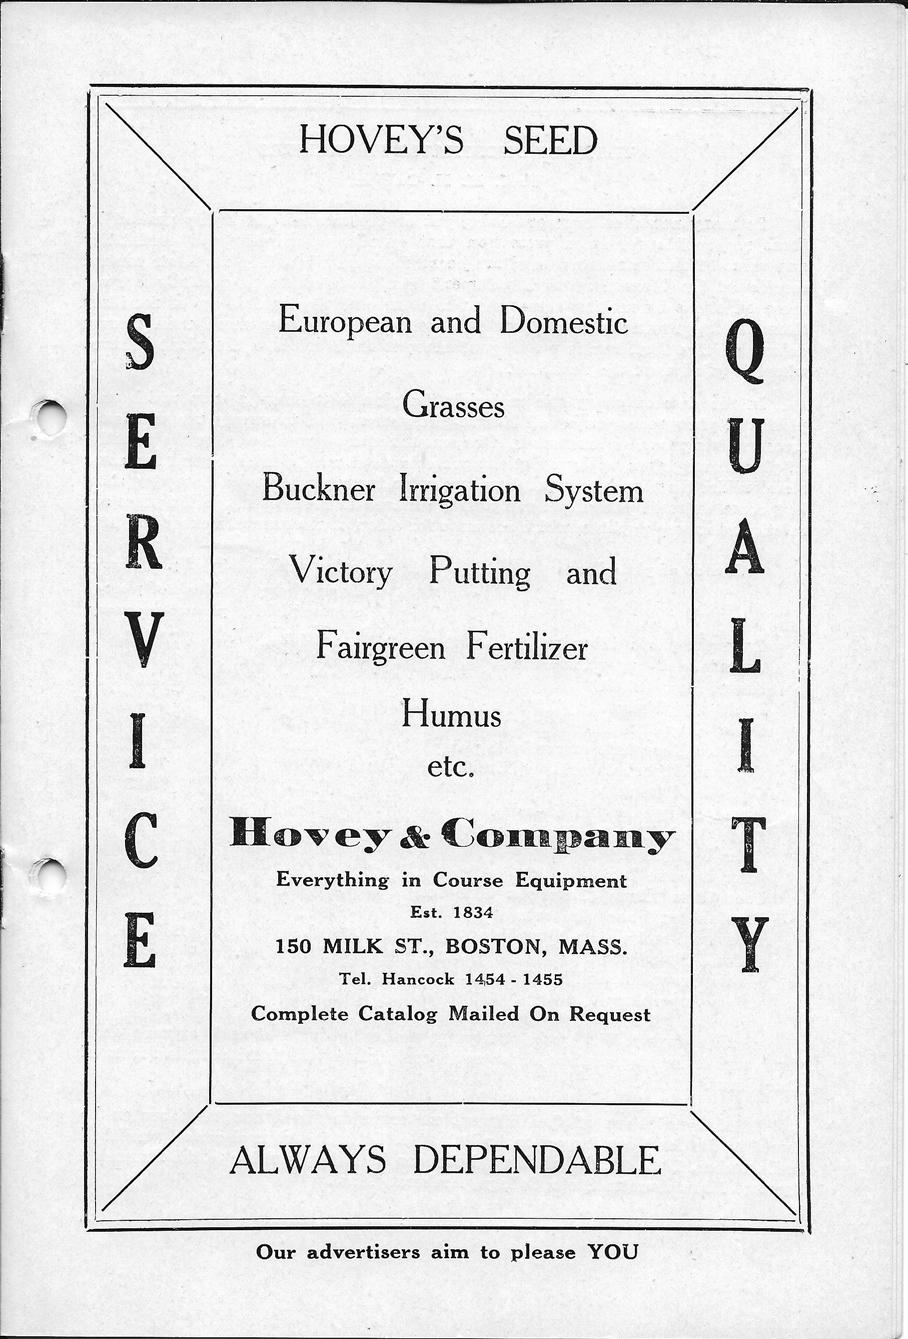 HOVEY'S SEED E European and Domestic Grasses Buckner Irrigation System Victory Putting and Fairgreen Fertilizer Humus etc, Uo^eyl- Company Everything in